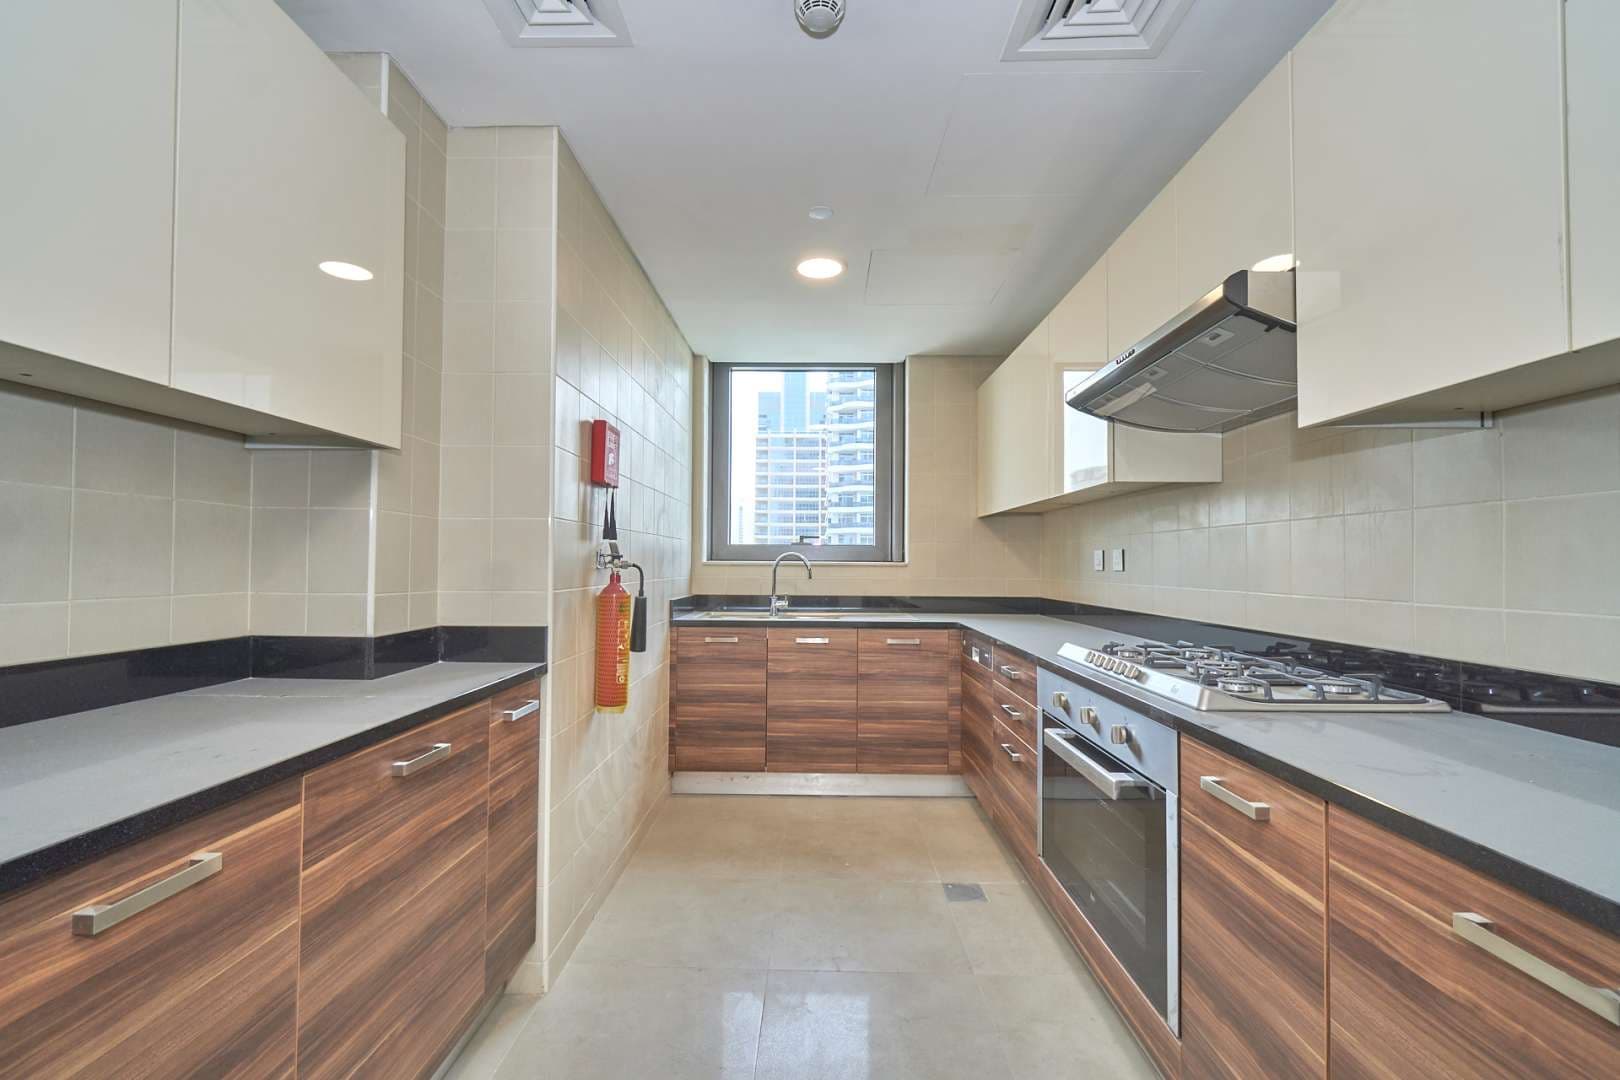 2 Bedroom Apartment For Rent Sparkle Towers Lp07205 281862241a3c0000.jpg